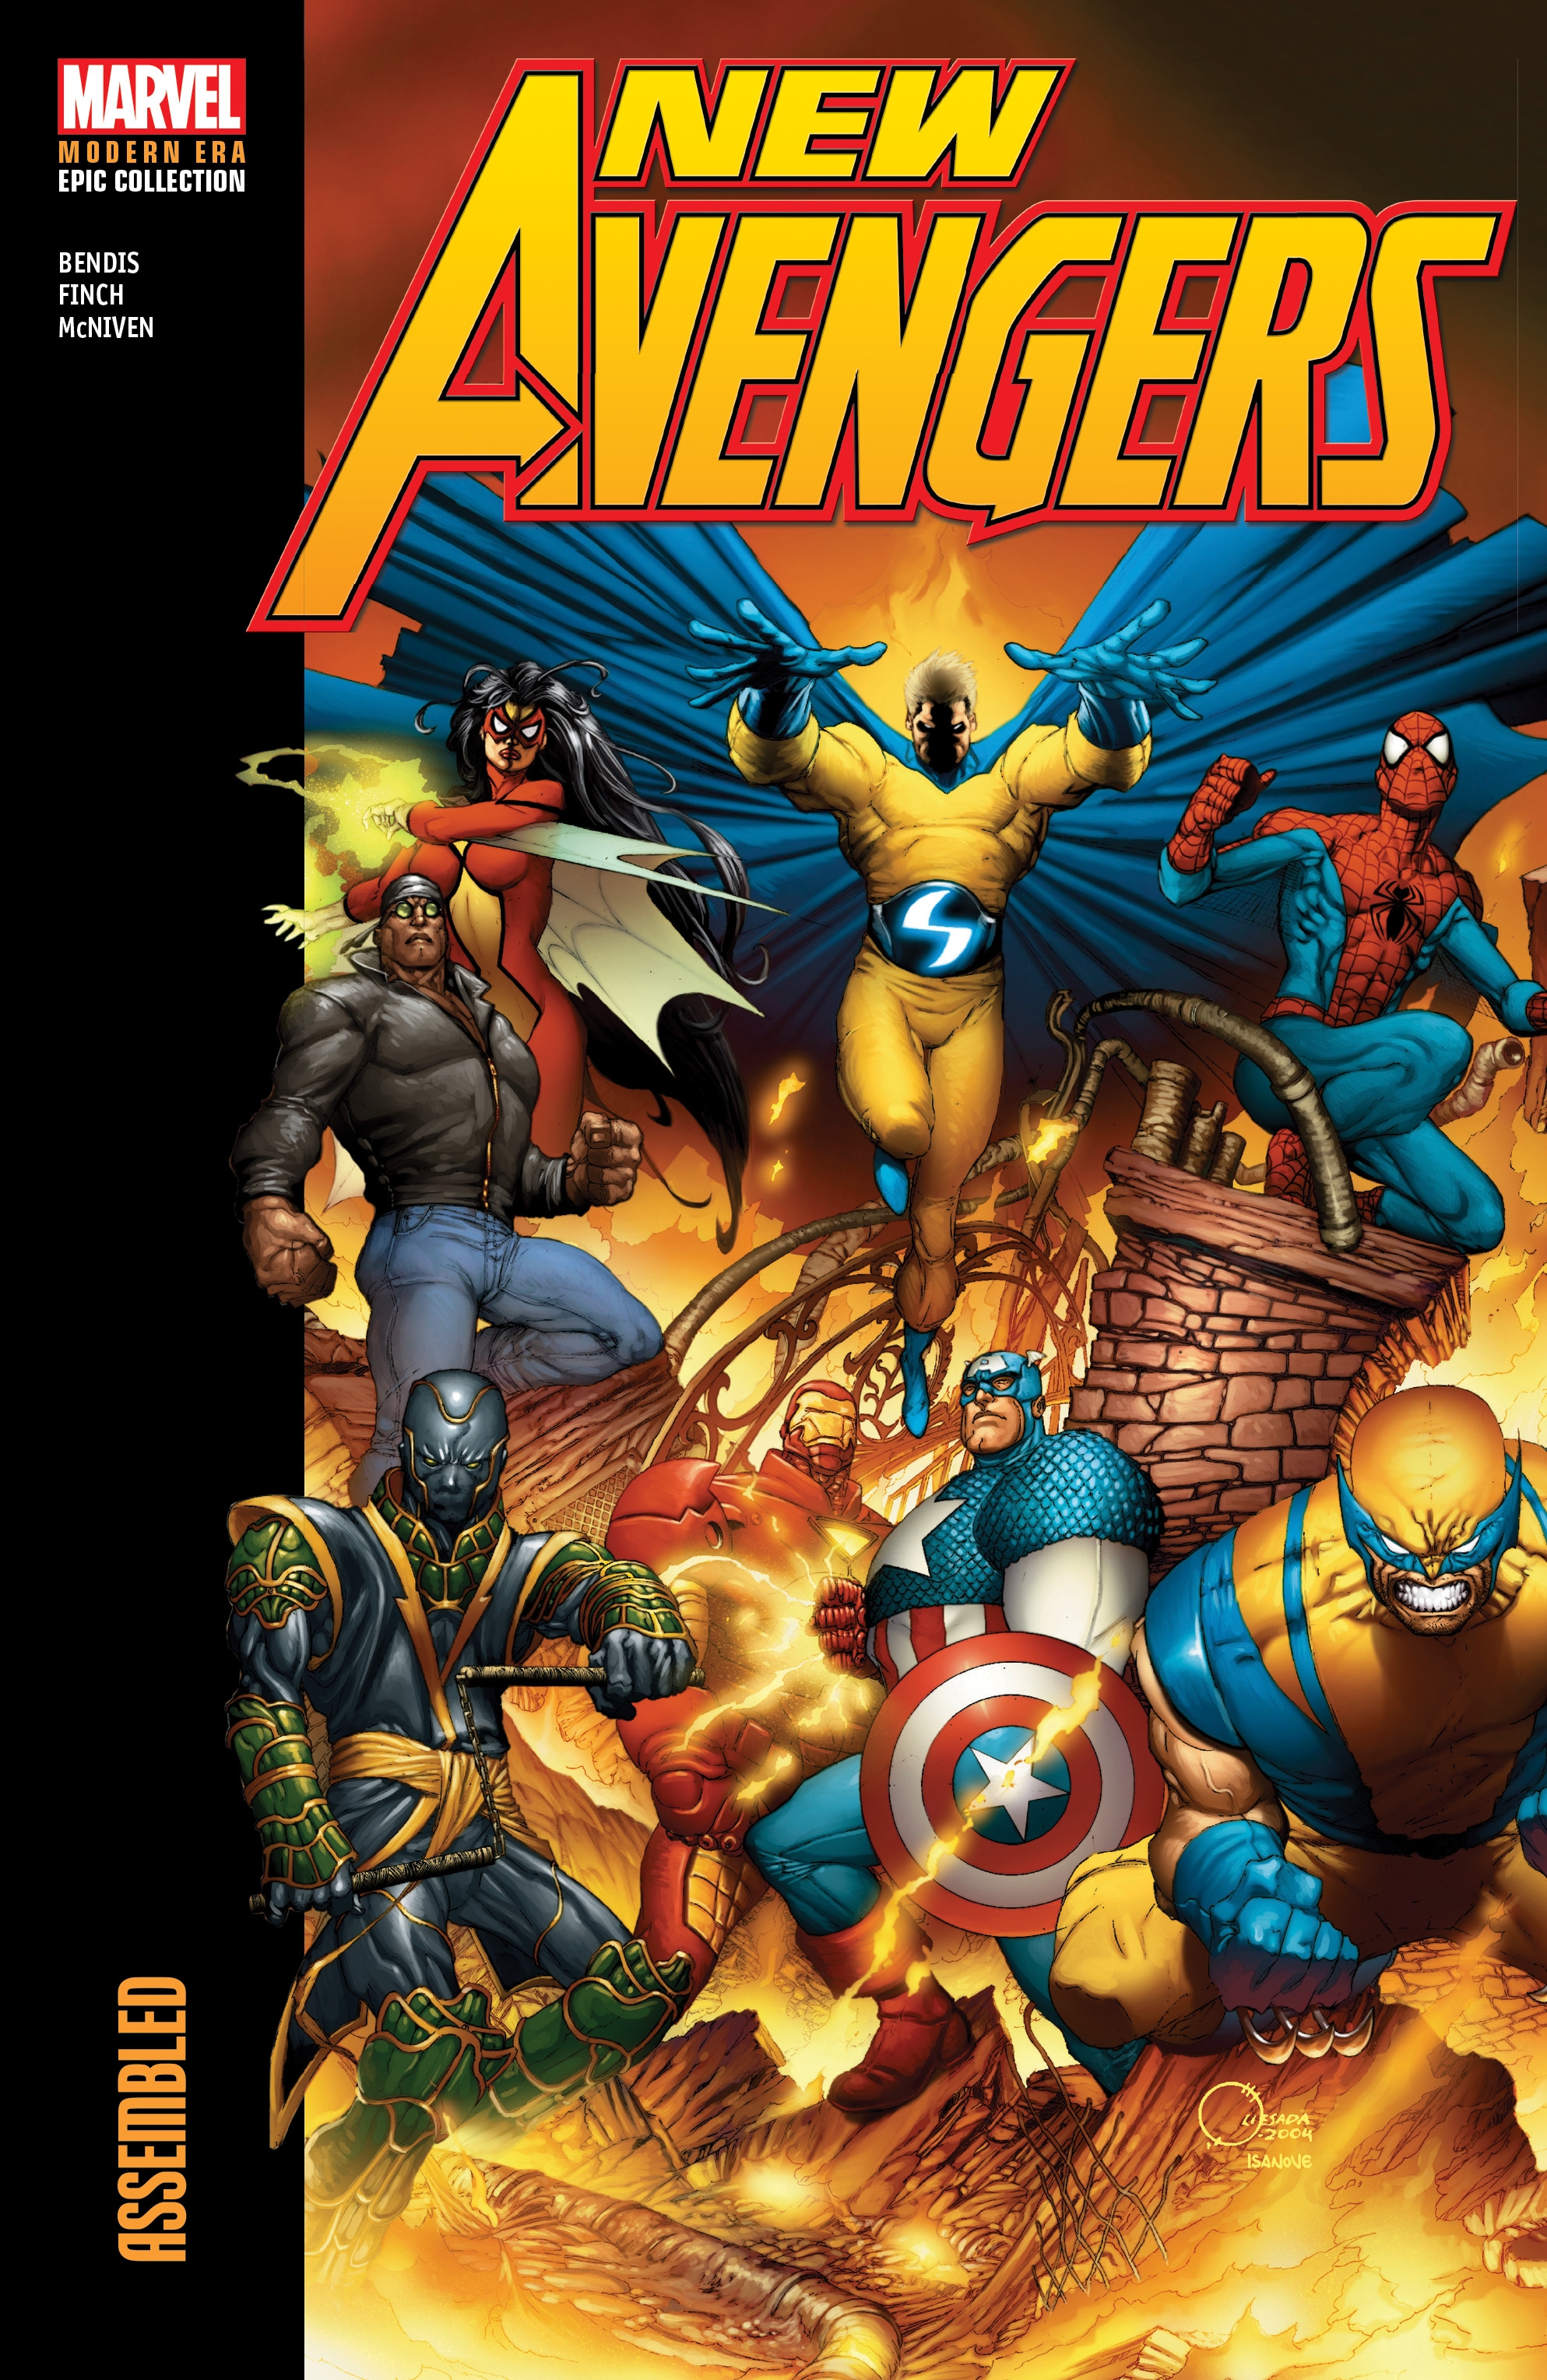 NEW AVENGERS MODERN ERA EPIC COLLECTION: ASSEMBLED by Brian Michael ...